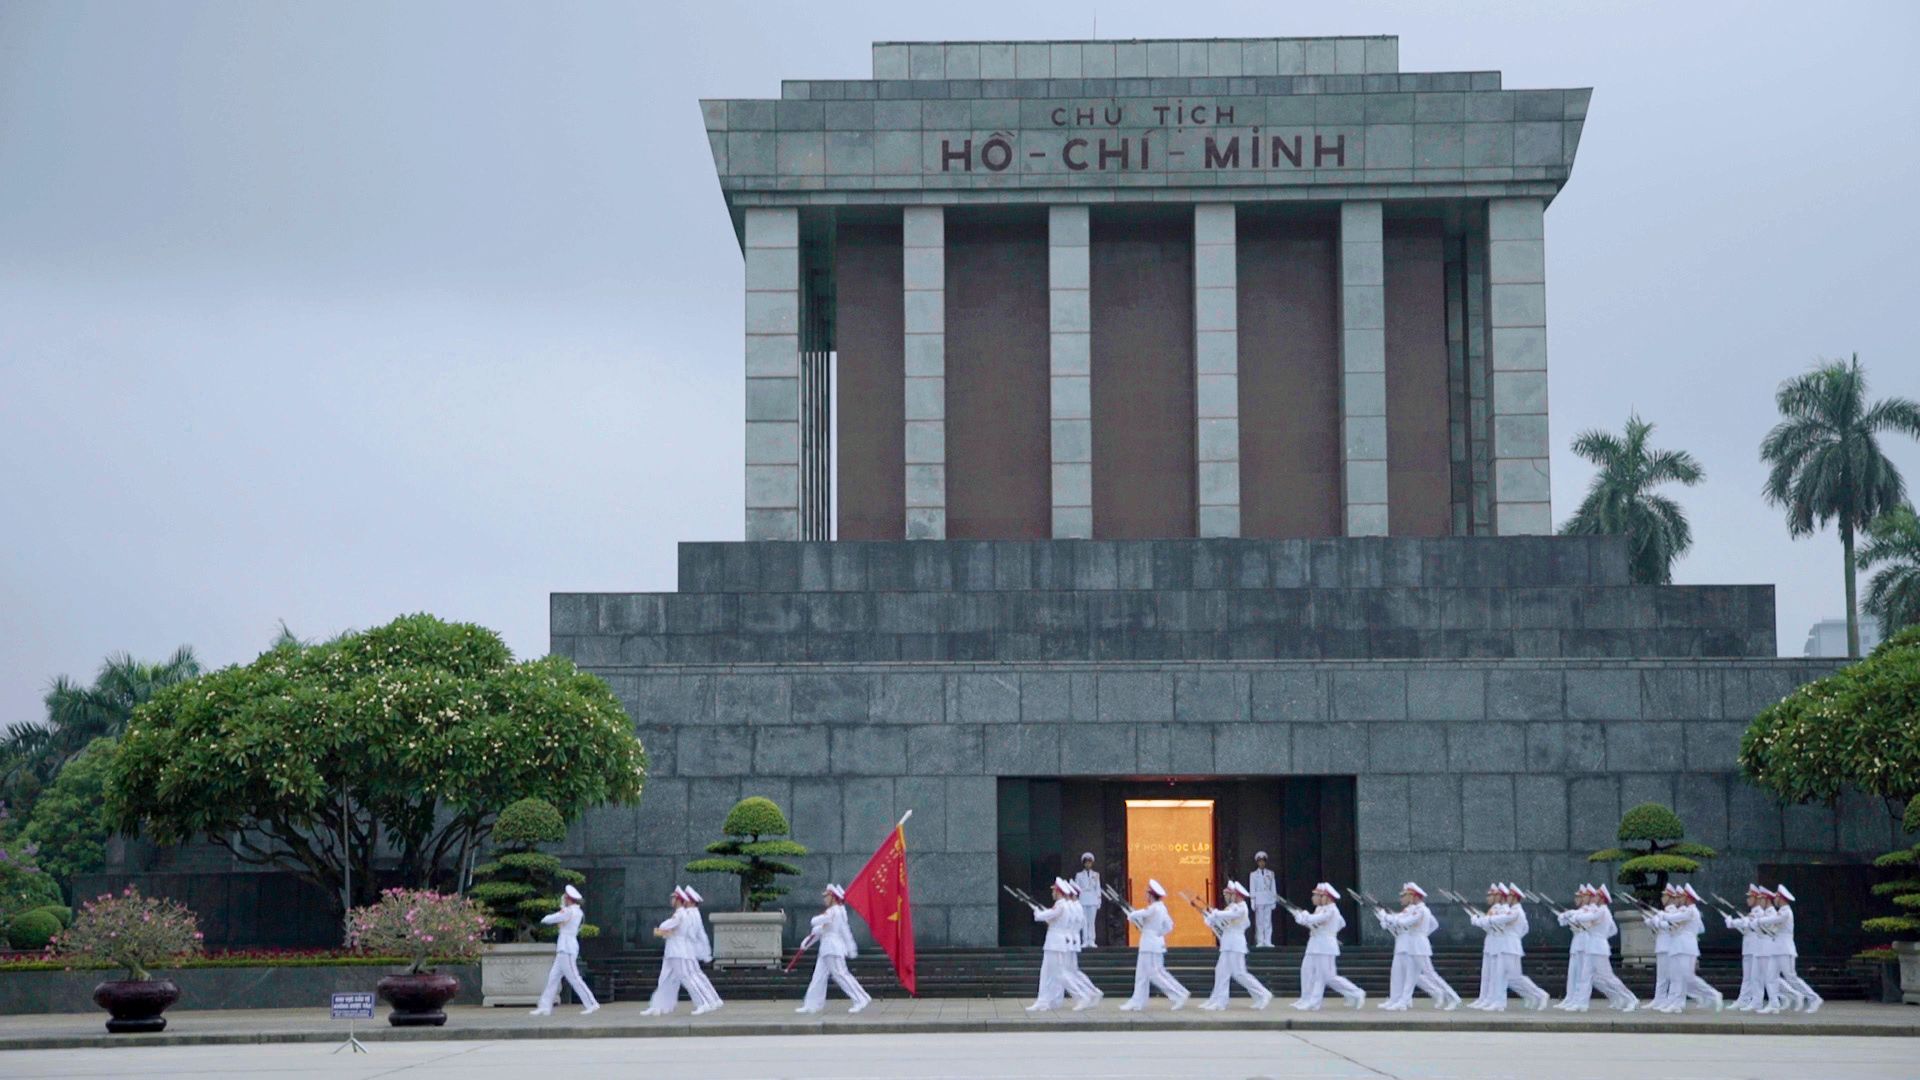 Ho Chi Minh Mausoleum: How to visit the sacred site in Vietnam